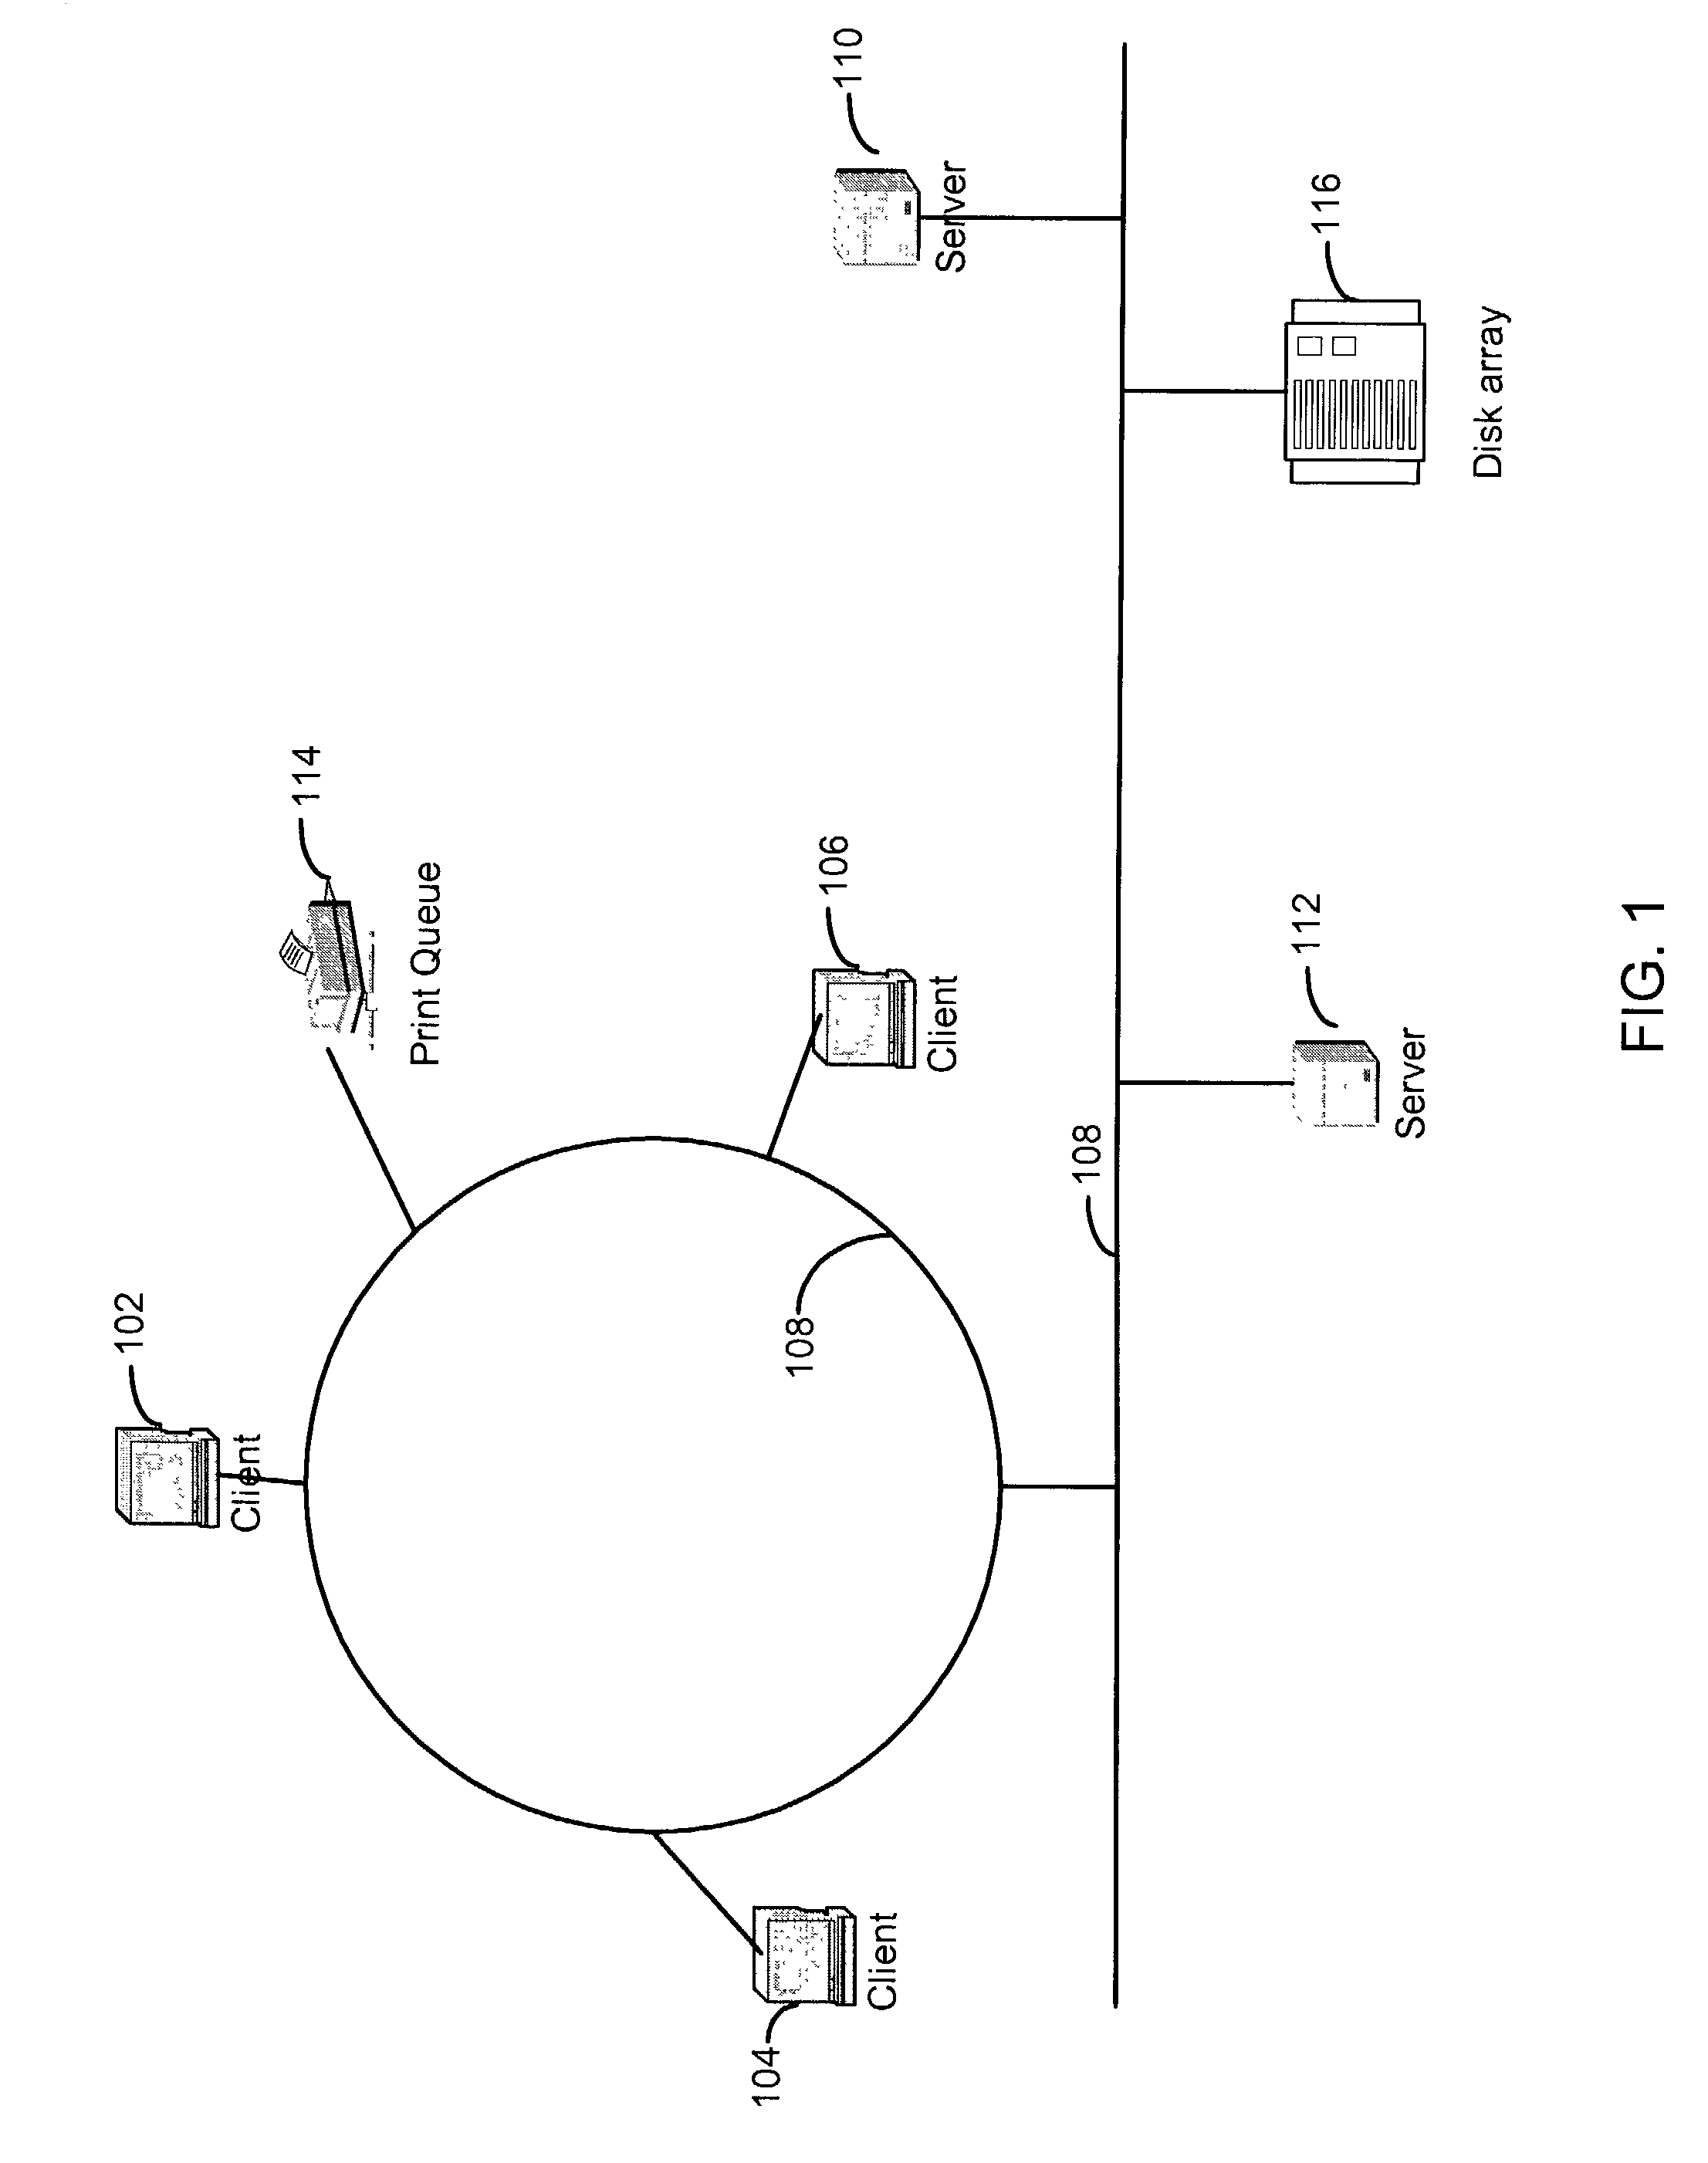 System and method for managing access rights and privileges in a data processing system